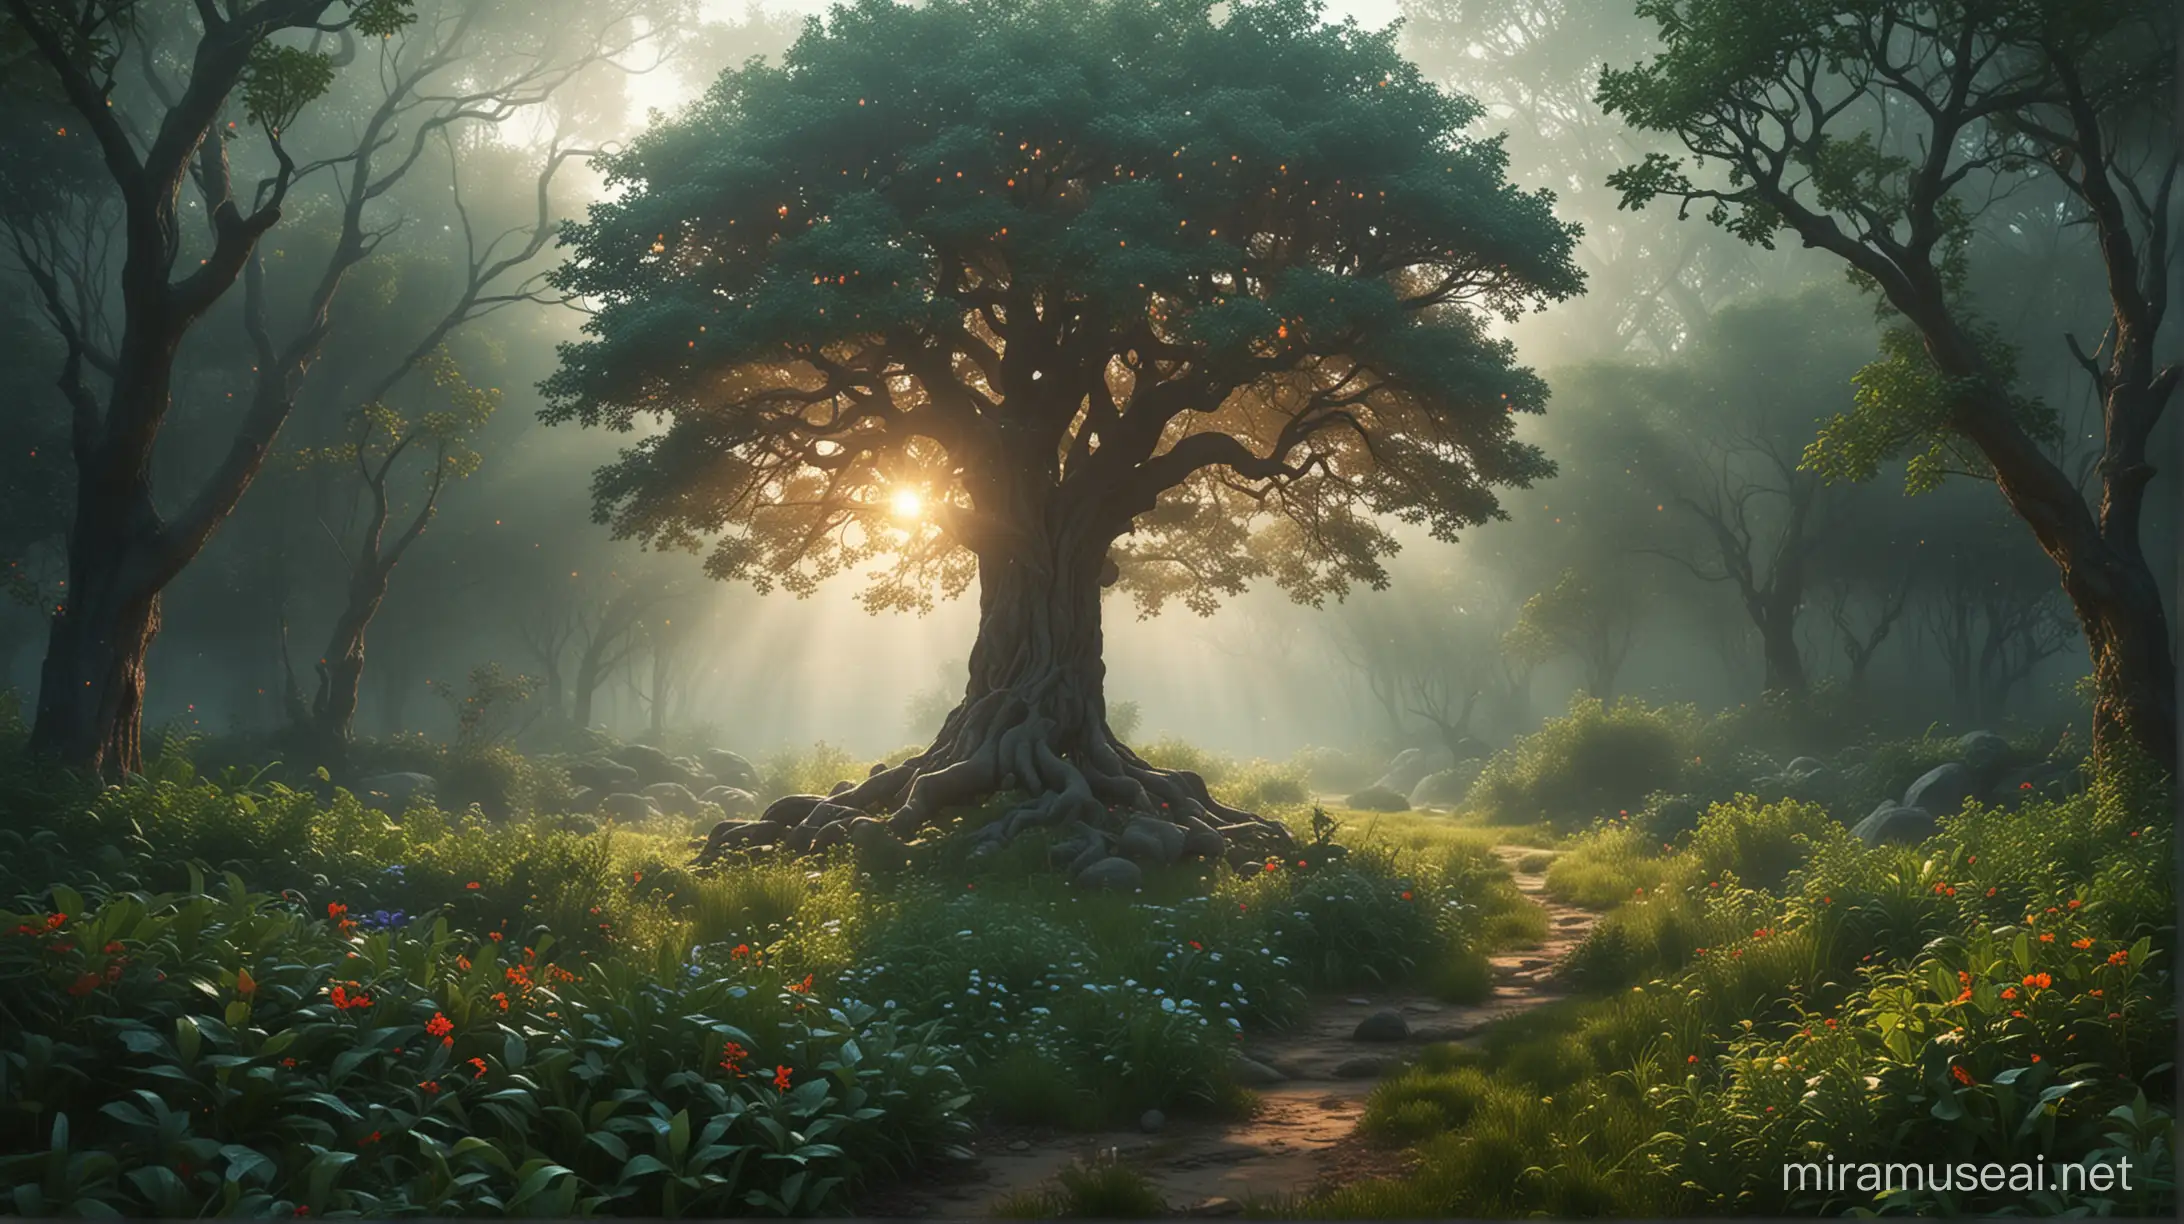 Whimsical, magical, The Garden of Eden, the tree of knowledge of good and evil in the center, its foliage surrounded by energy, radiating soft light, The landscape is full of trees, bushes, background flowing towards the edges, creating the illusion of movement, dramatic lighting, digital illustration, extremely bright colors, eerie light, fog in the background, scattered with lush grass, bushes and rocks. lending magic to the atmosphere. The general mood of the picture is calm and dreamy, foreboding